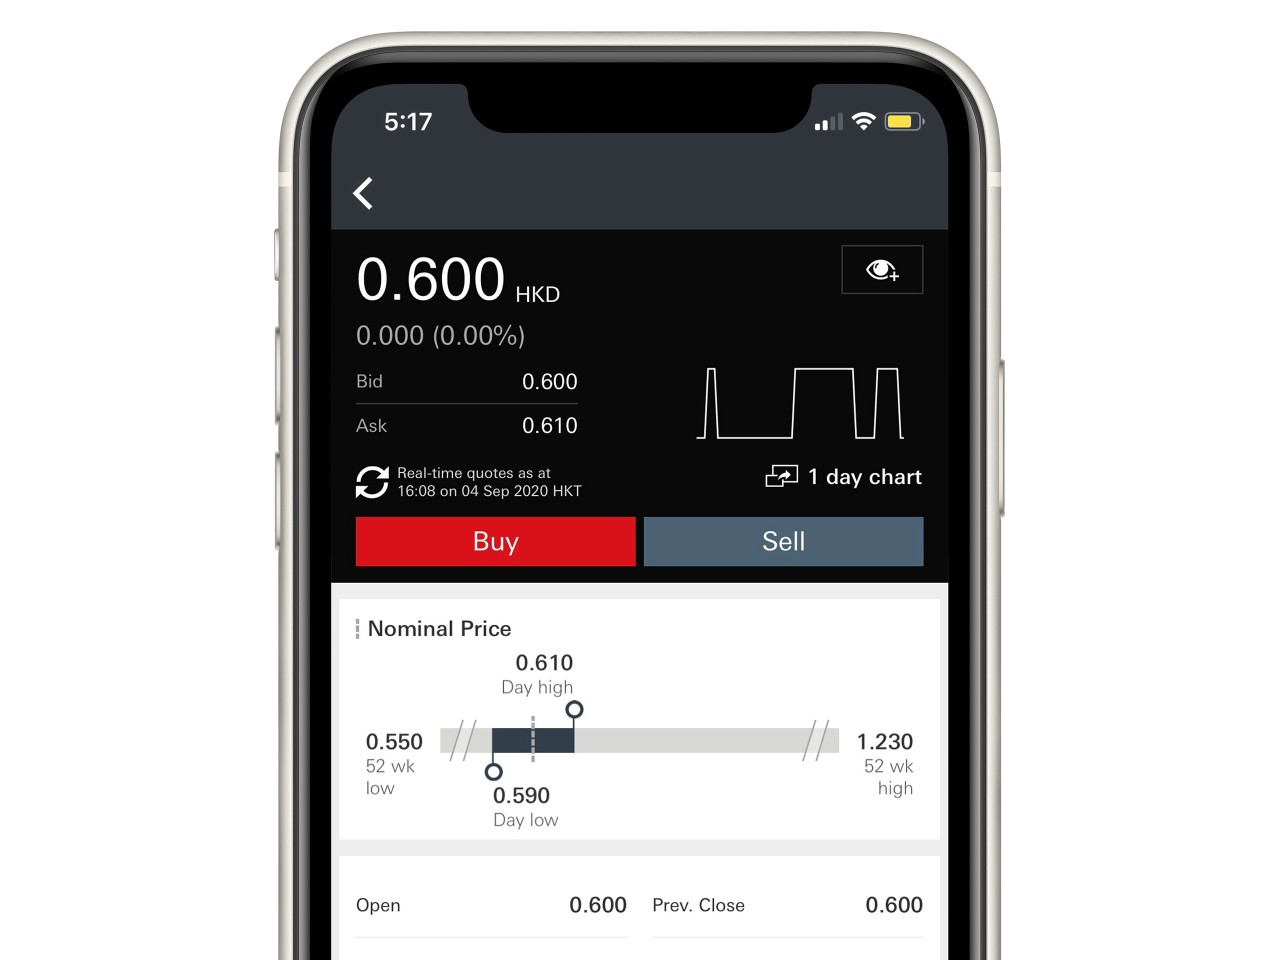 Screenshot of HSBC Easy Invest App; showing the Buy/Sell buttons of stocks trading